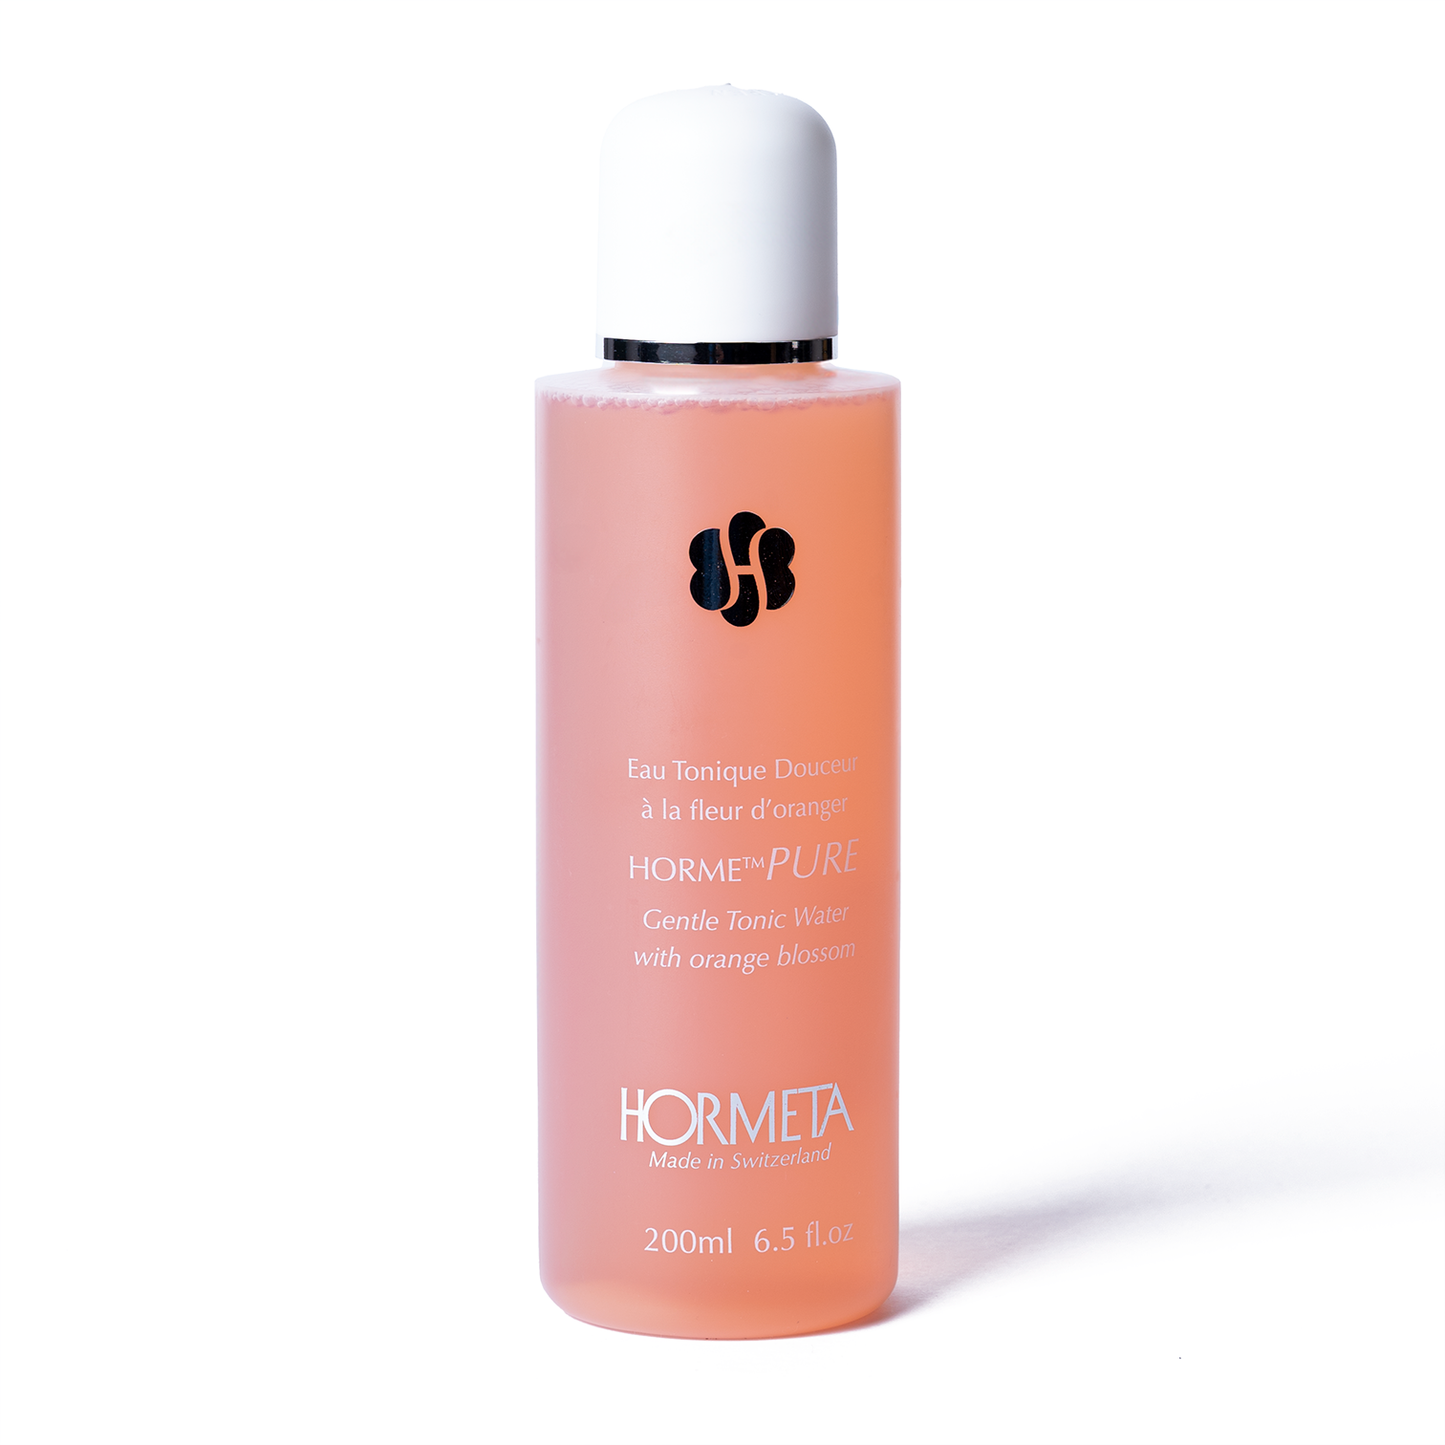 HormePURE Gentle Tonic Water with Orange Blossom